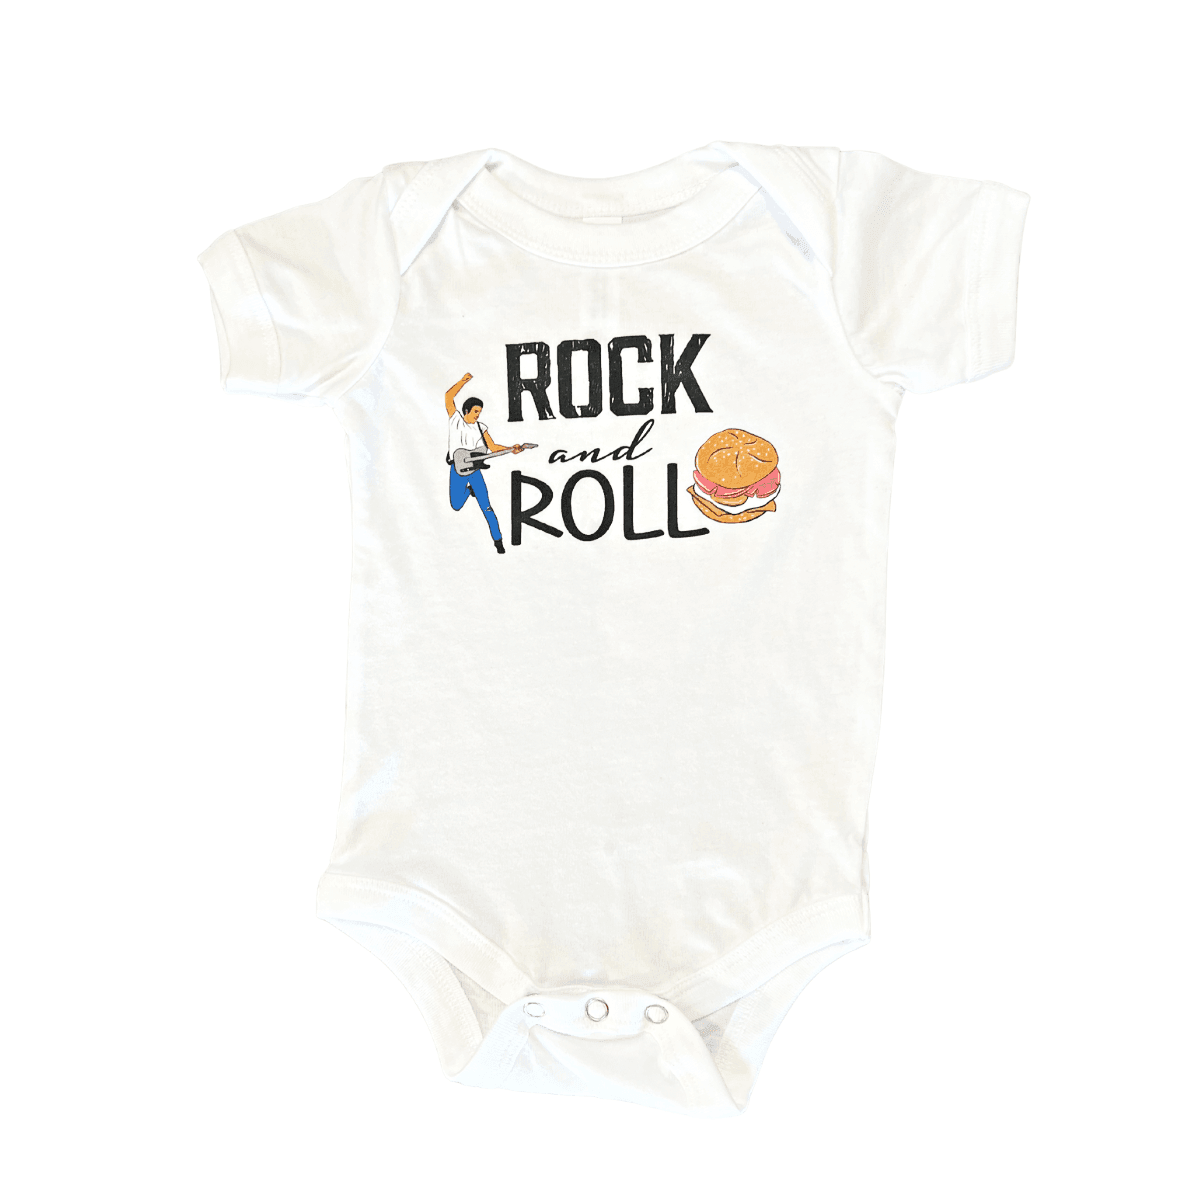 White baby onesie with "New Jersey Rock and Roll" text and a guitar graphic, set against a plain background.